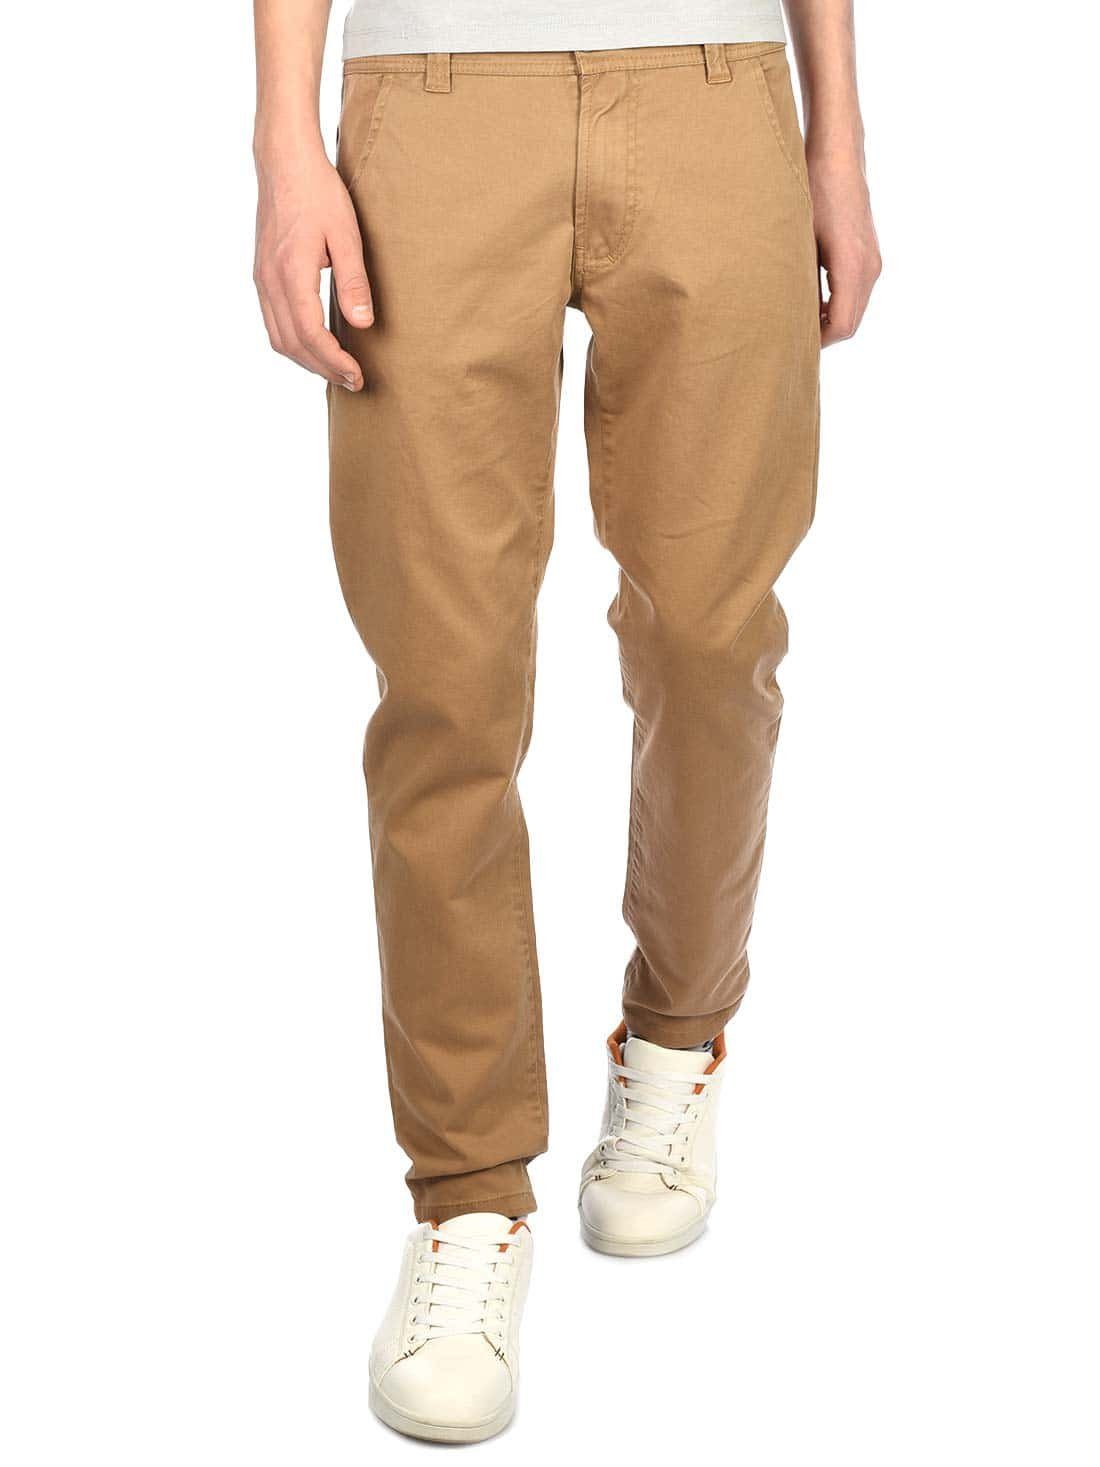 Chino Jungen BEZLIT Beige Hose Chinohose (1-tlg) casual